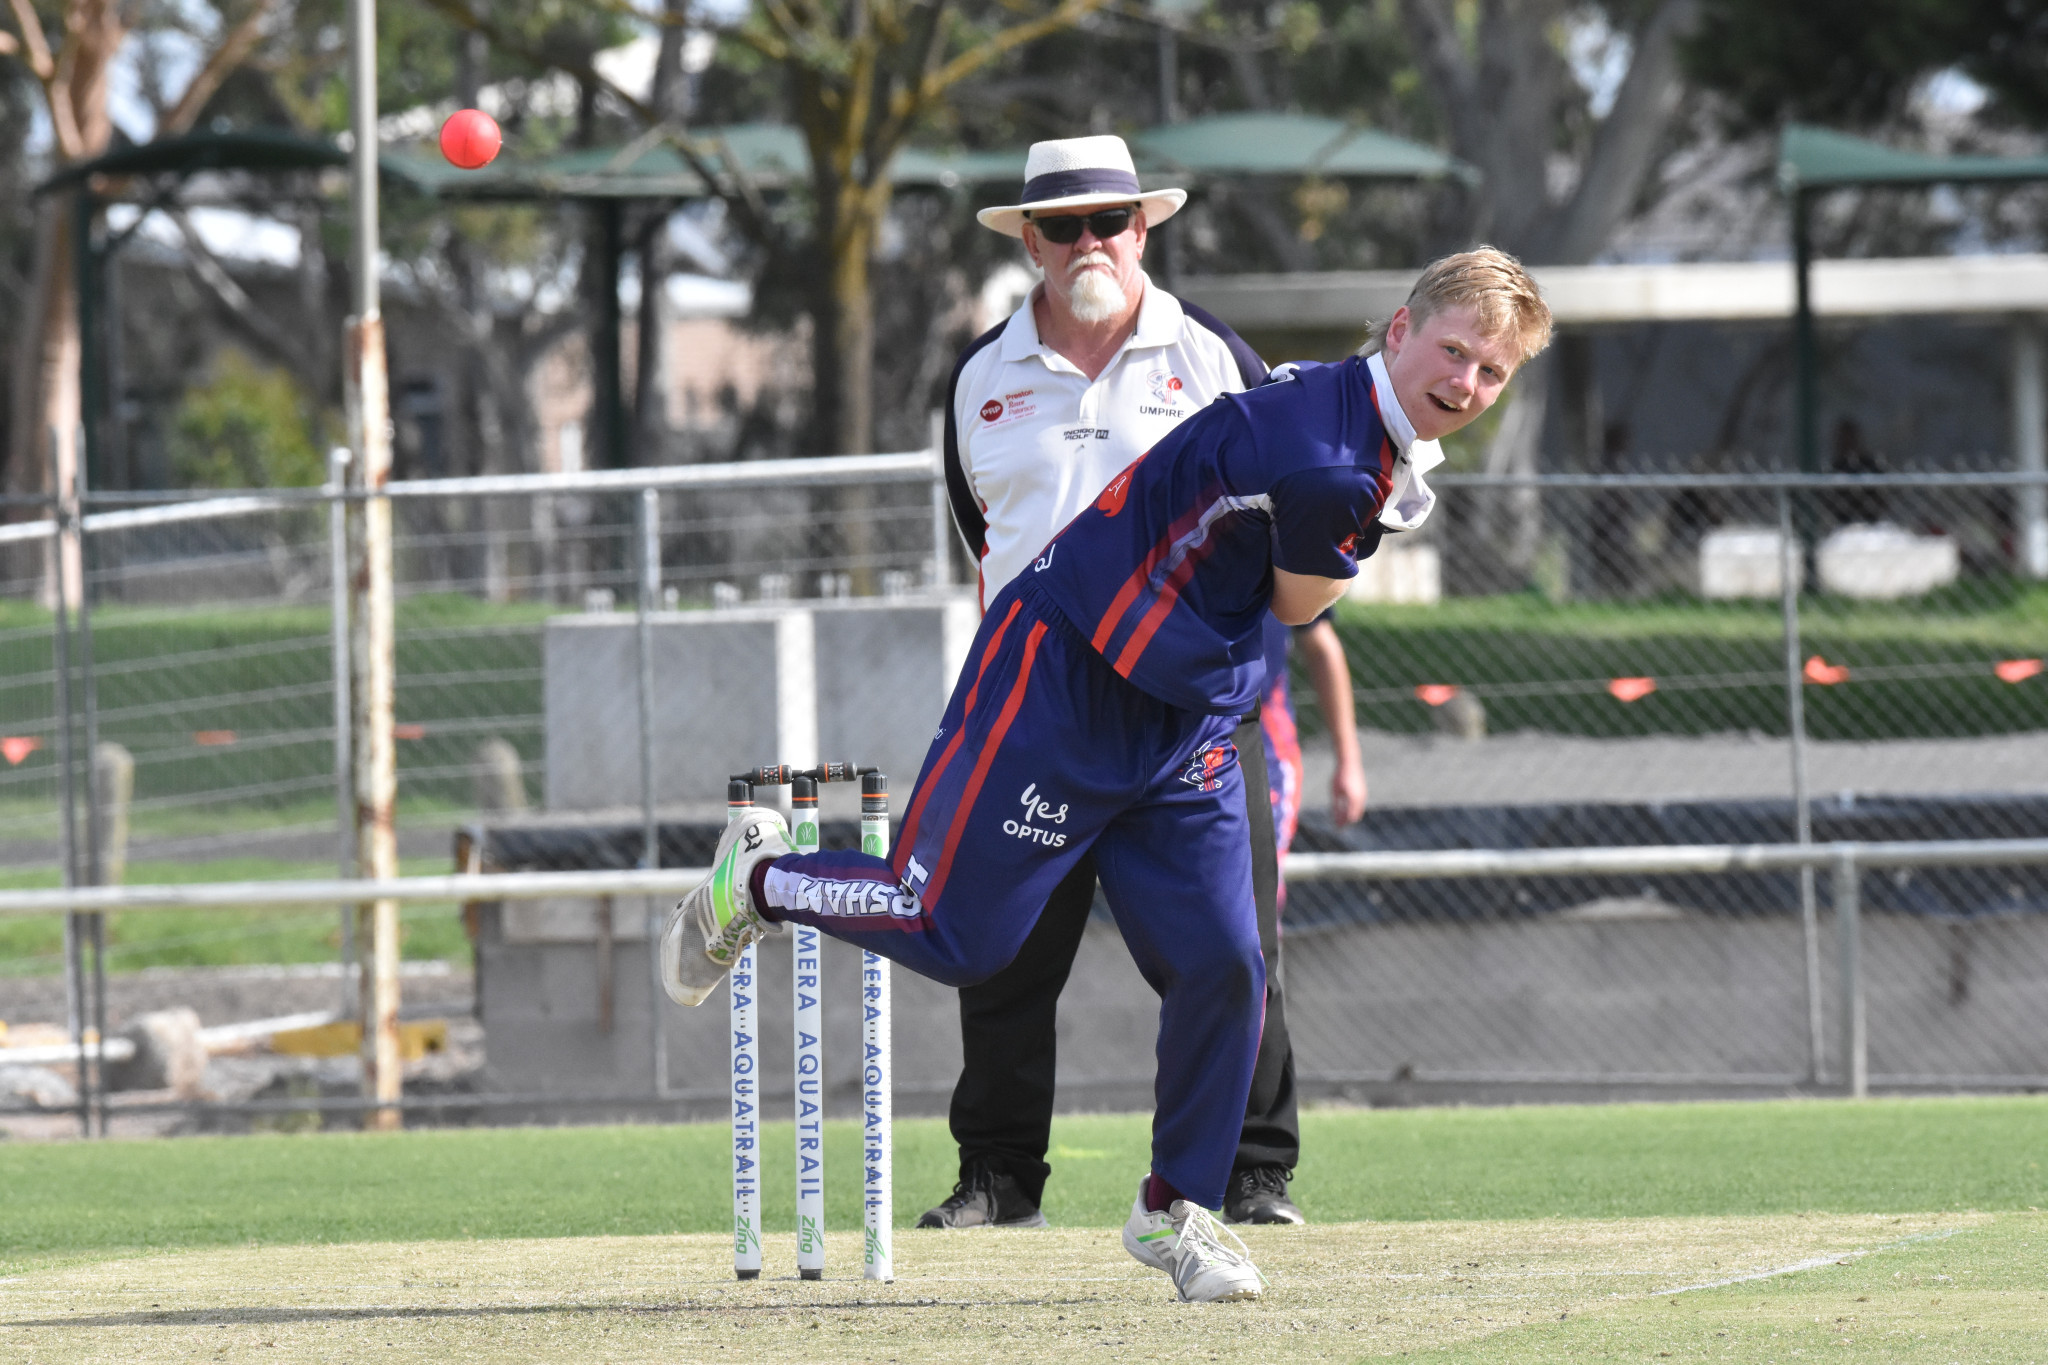 Max Bunworth bowling for the senior representative team's match against Wimmera Mallee on Saturday at Horsham City Oval. He scored 28 runs in their win.